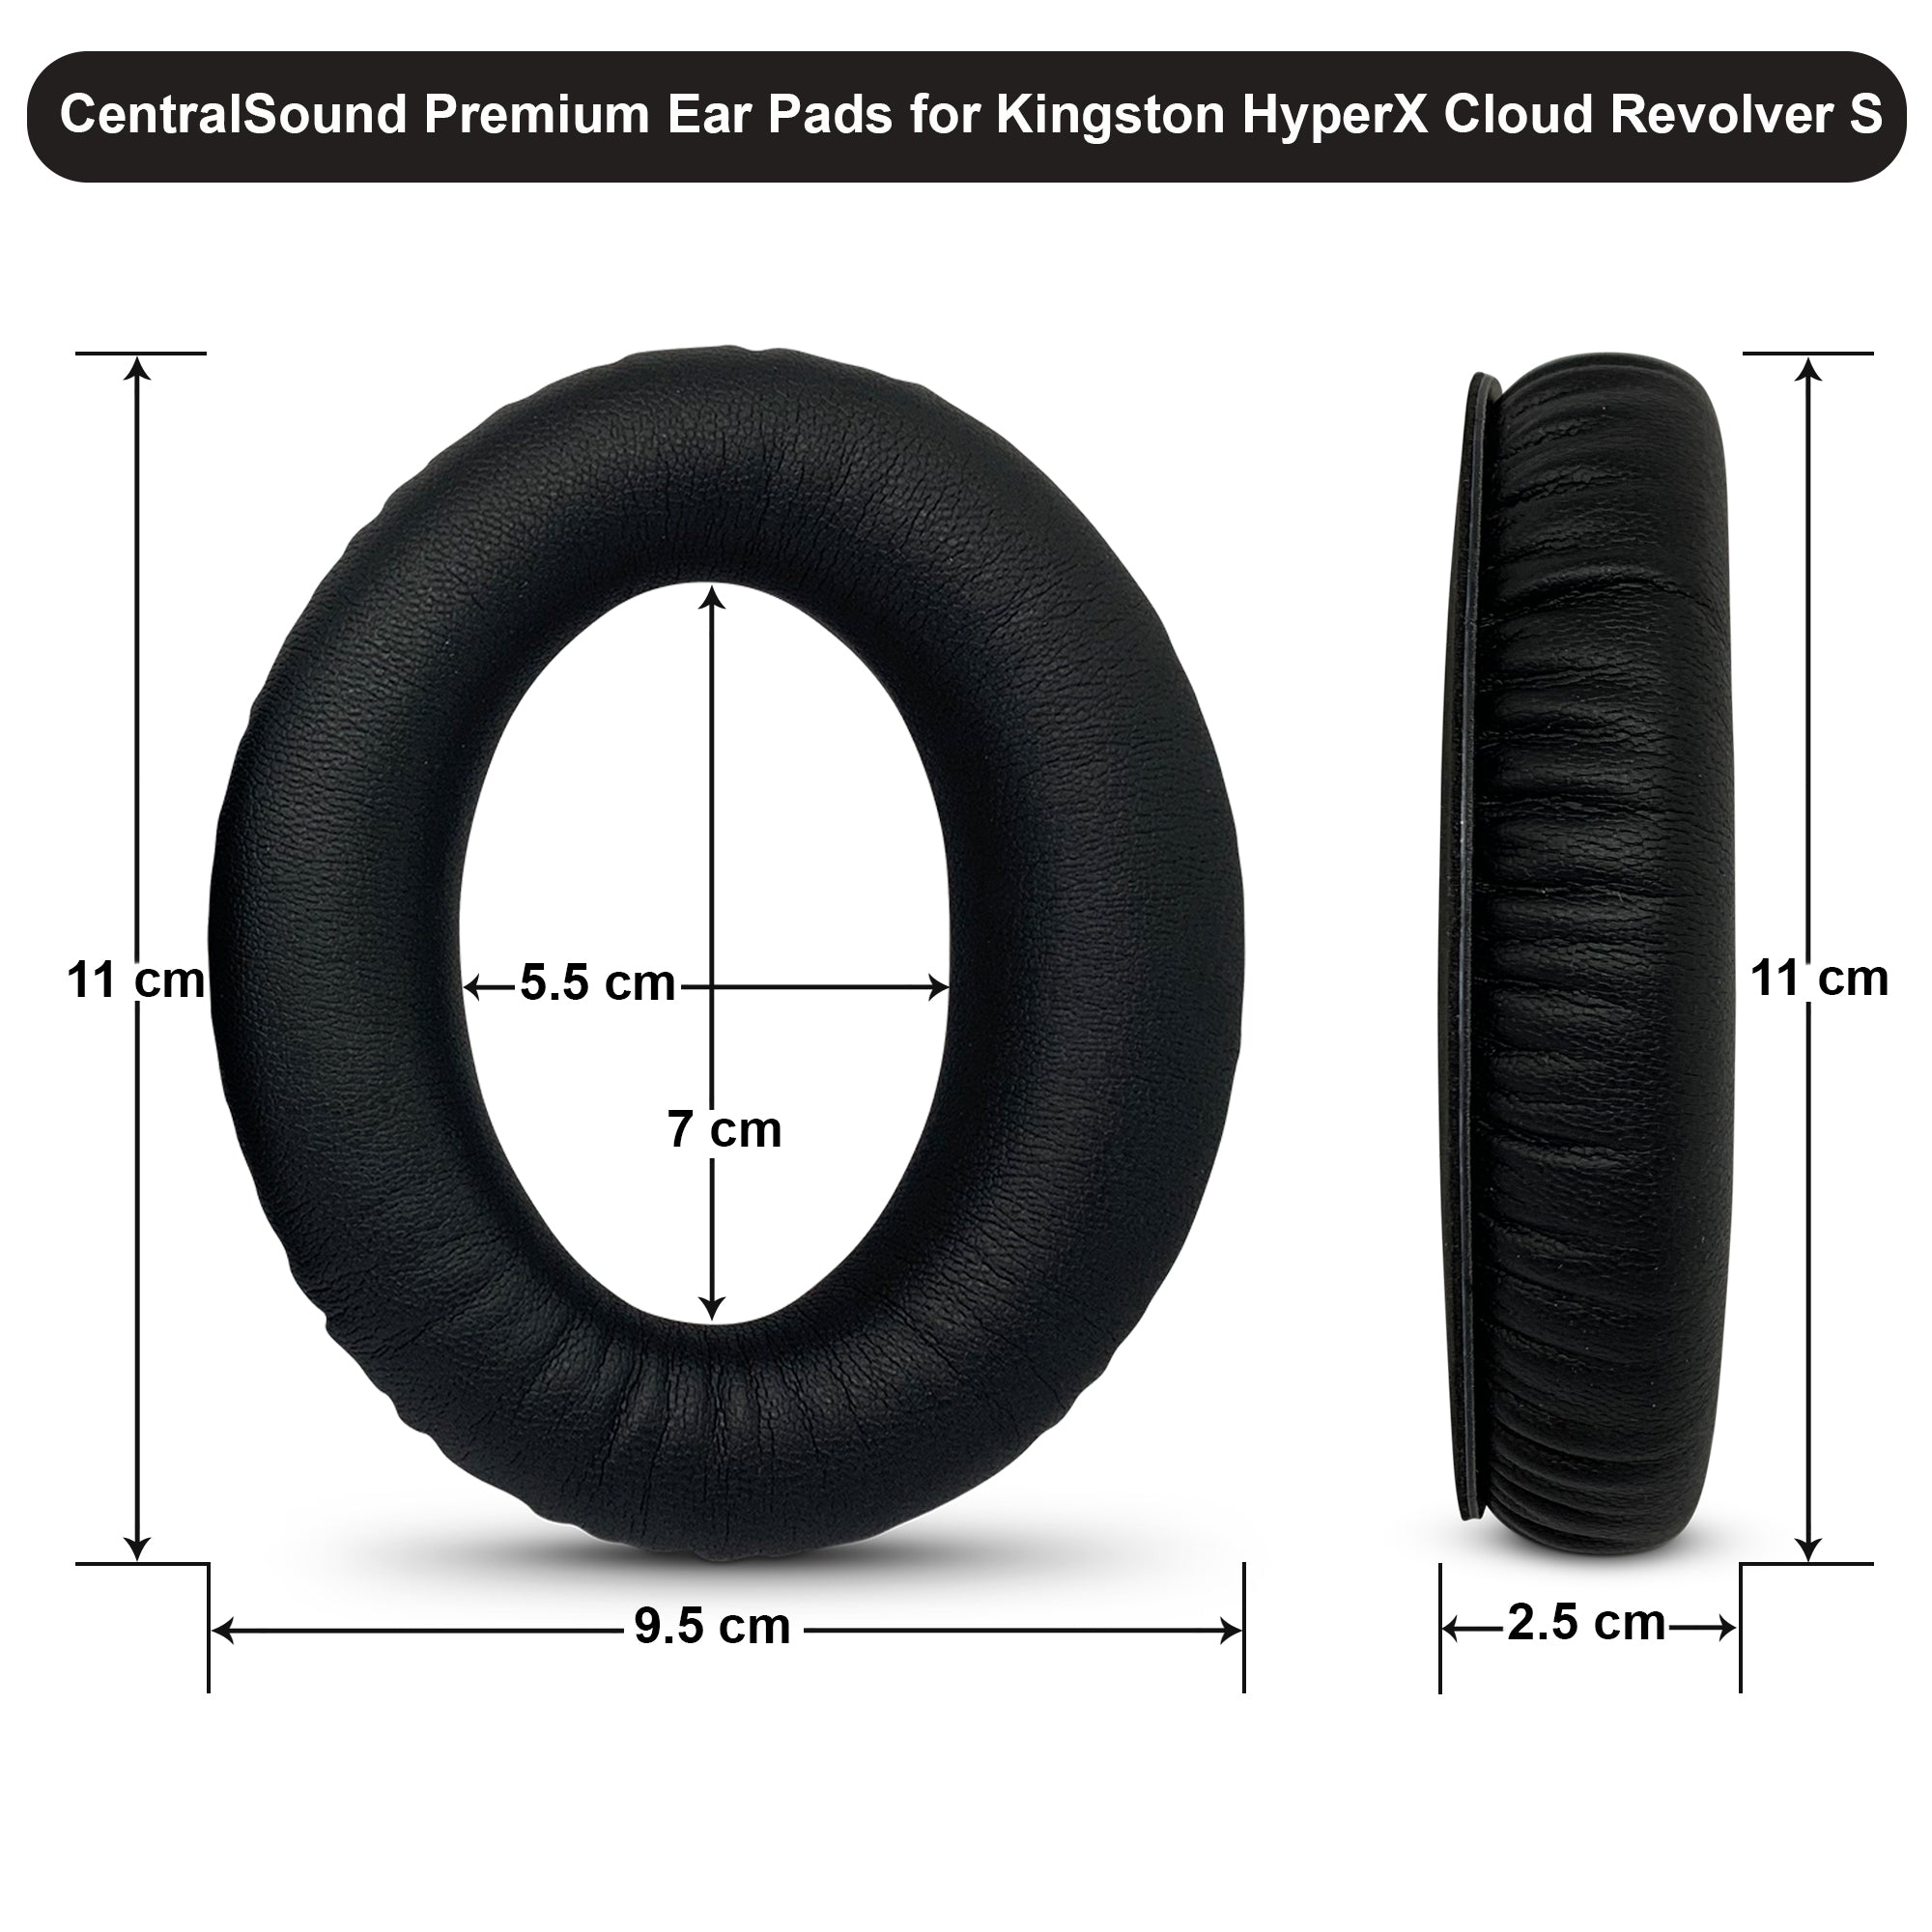 Premium Replacement Ear Pad Cushions for Kingston HyperX Cloud Revolver S Gaming Headset - CentralSound